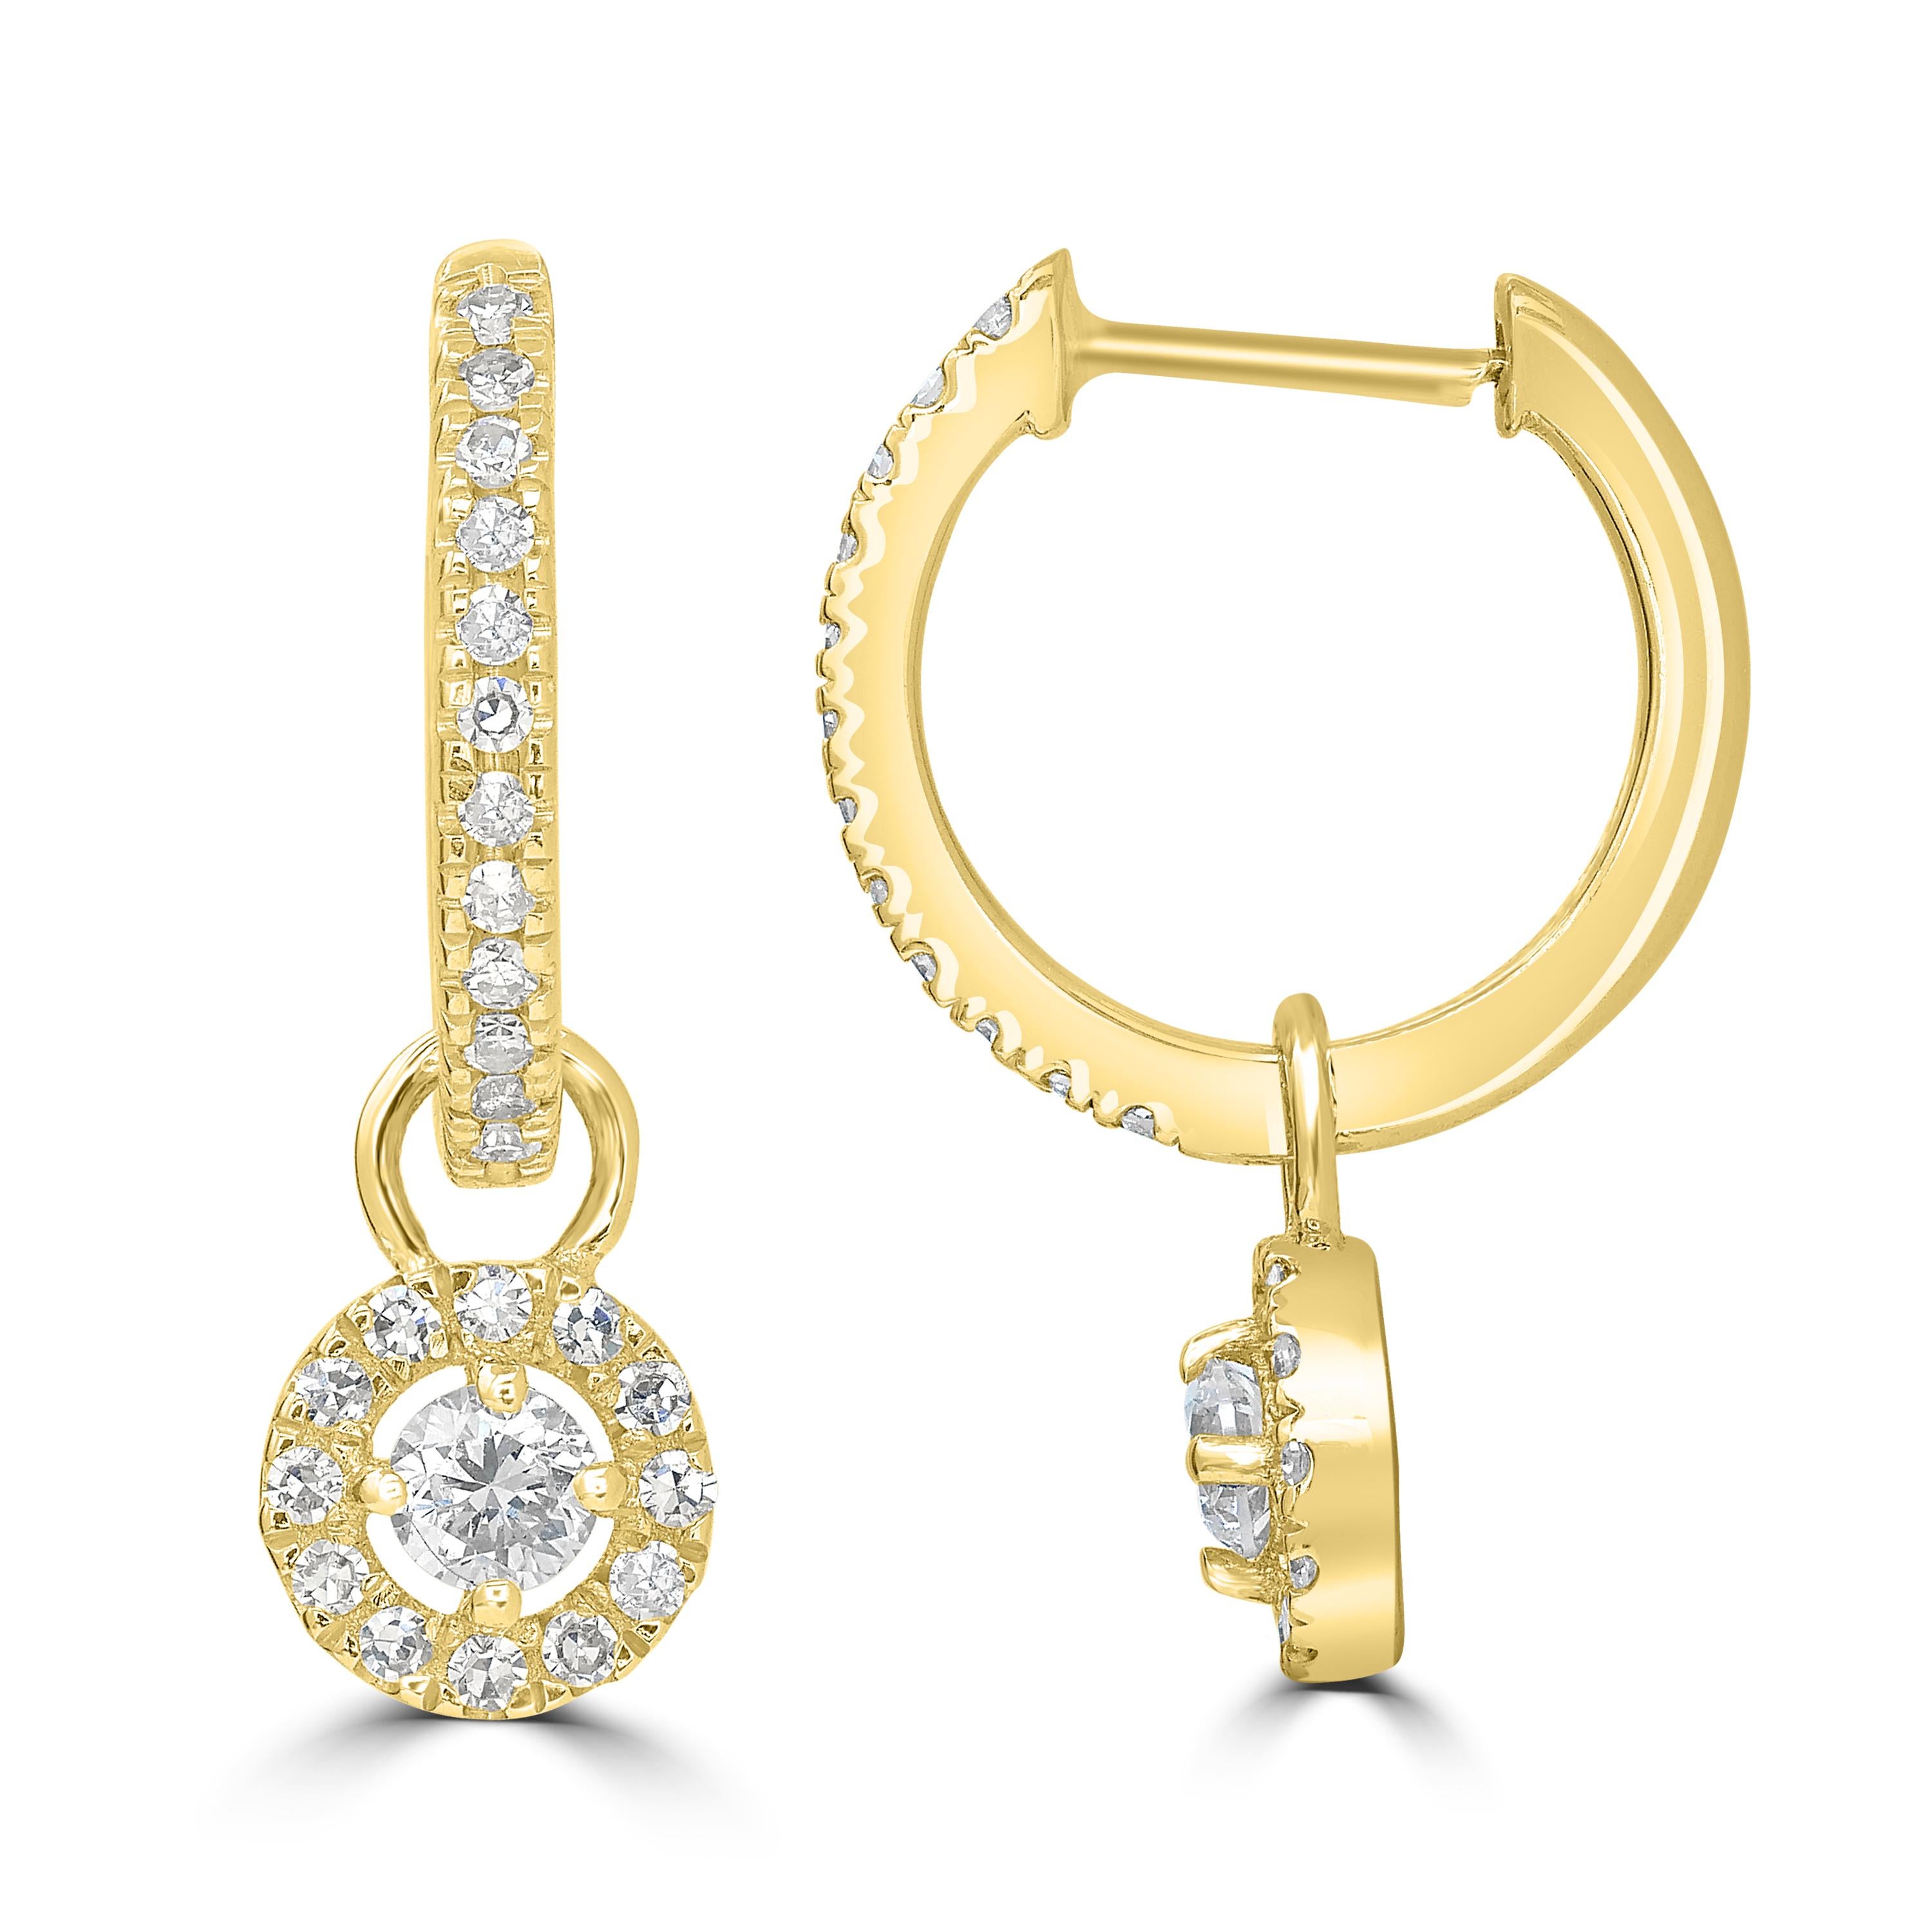 Make a stunning impression with these Luxle drop hoop earrings made with 14k yellow gold and genuine diamonds. These lobe-hugging earrings have a lovely circular pattern that descends down and moves with the wearer. These snap-post earrings are